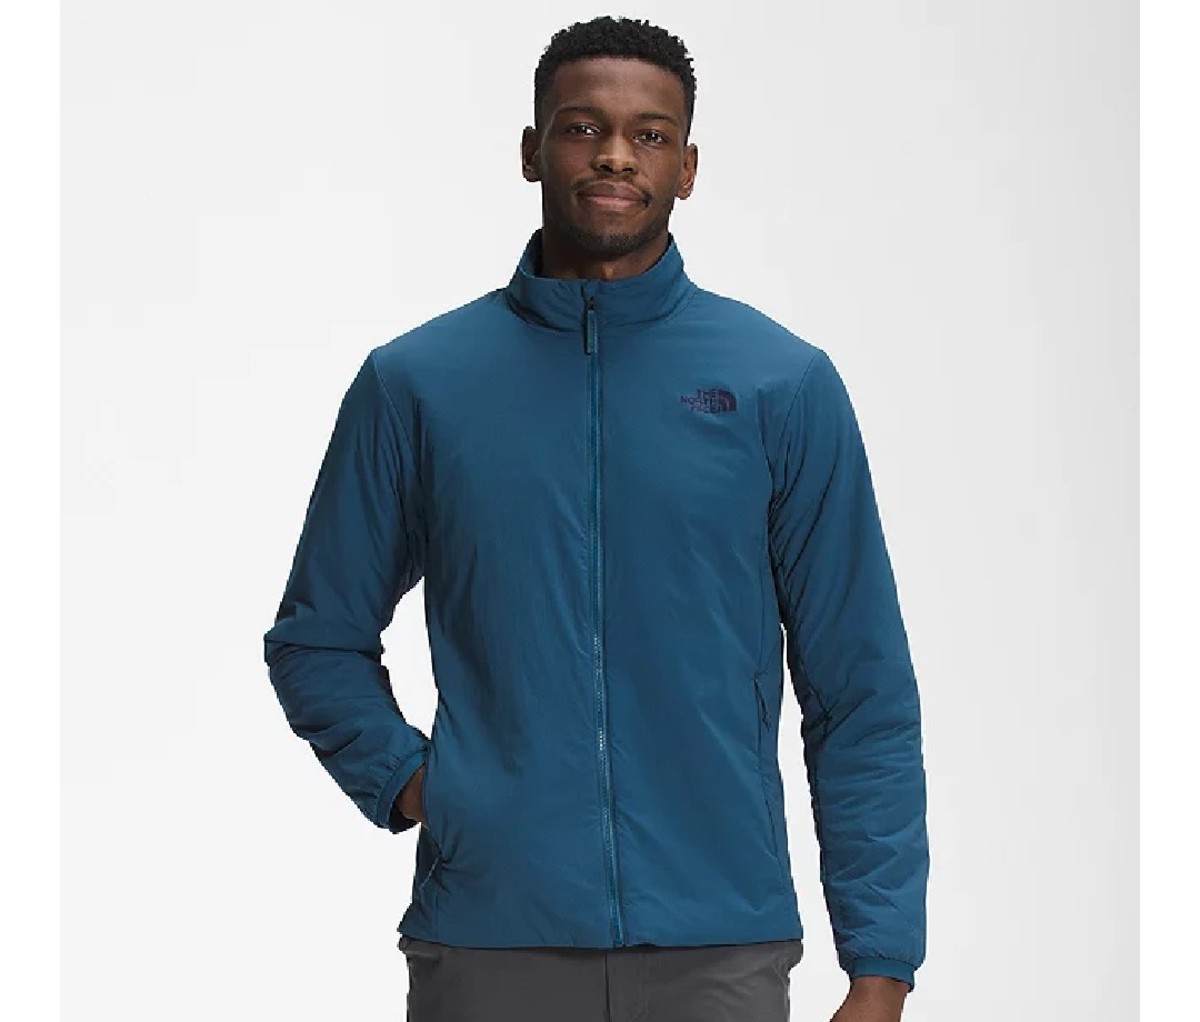 Man wearing blue The North Face Ventrix Jacket